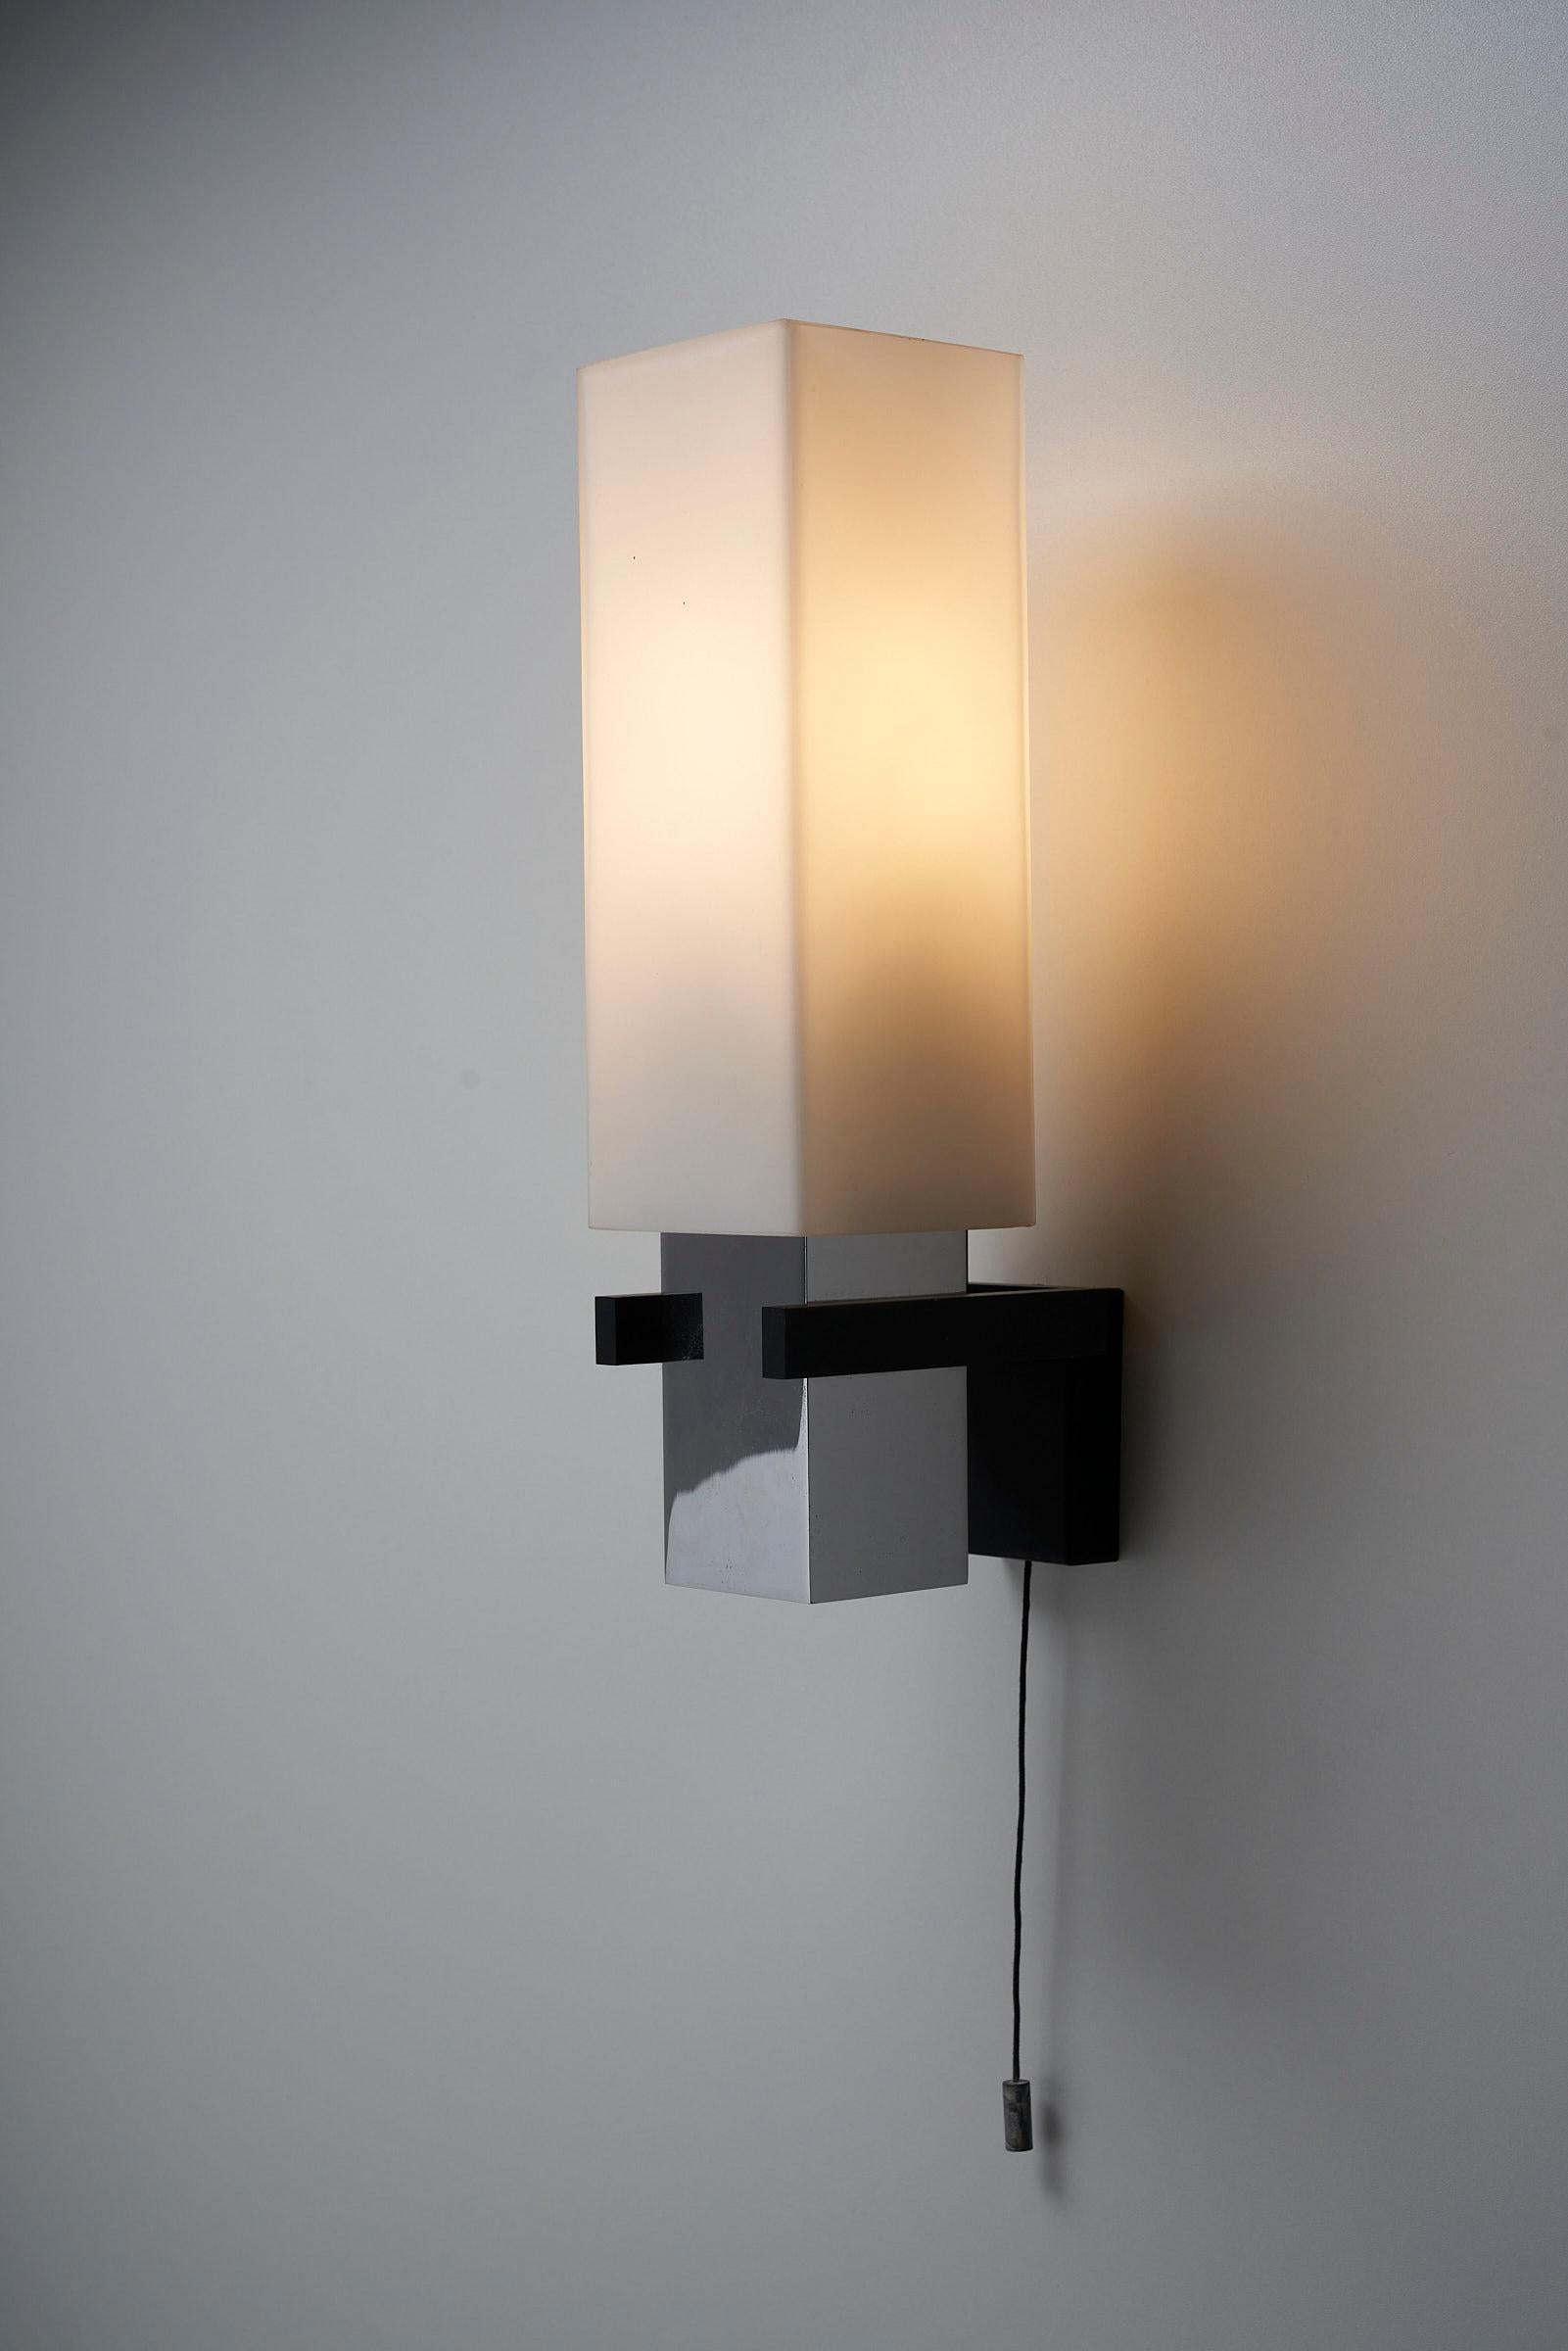 Hand-Crafted Futuristic Wall Lamps By Cosack, Germany For Sale